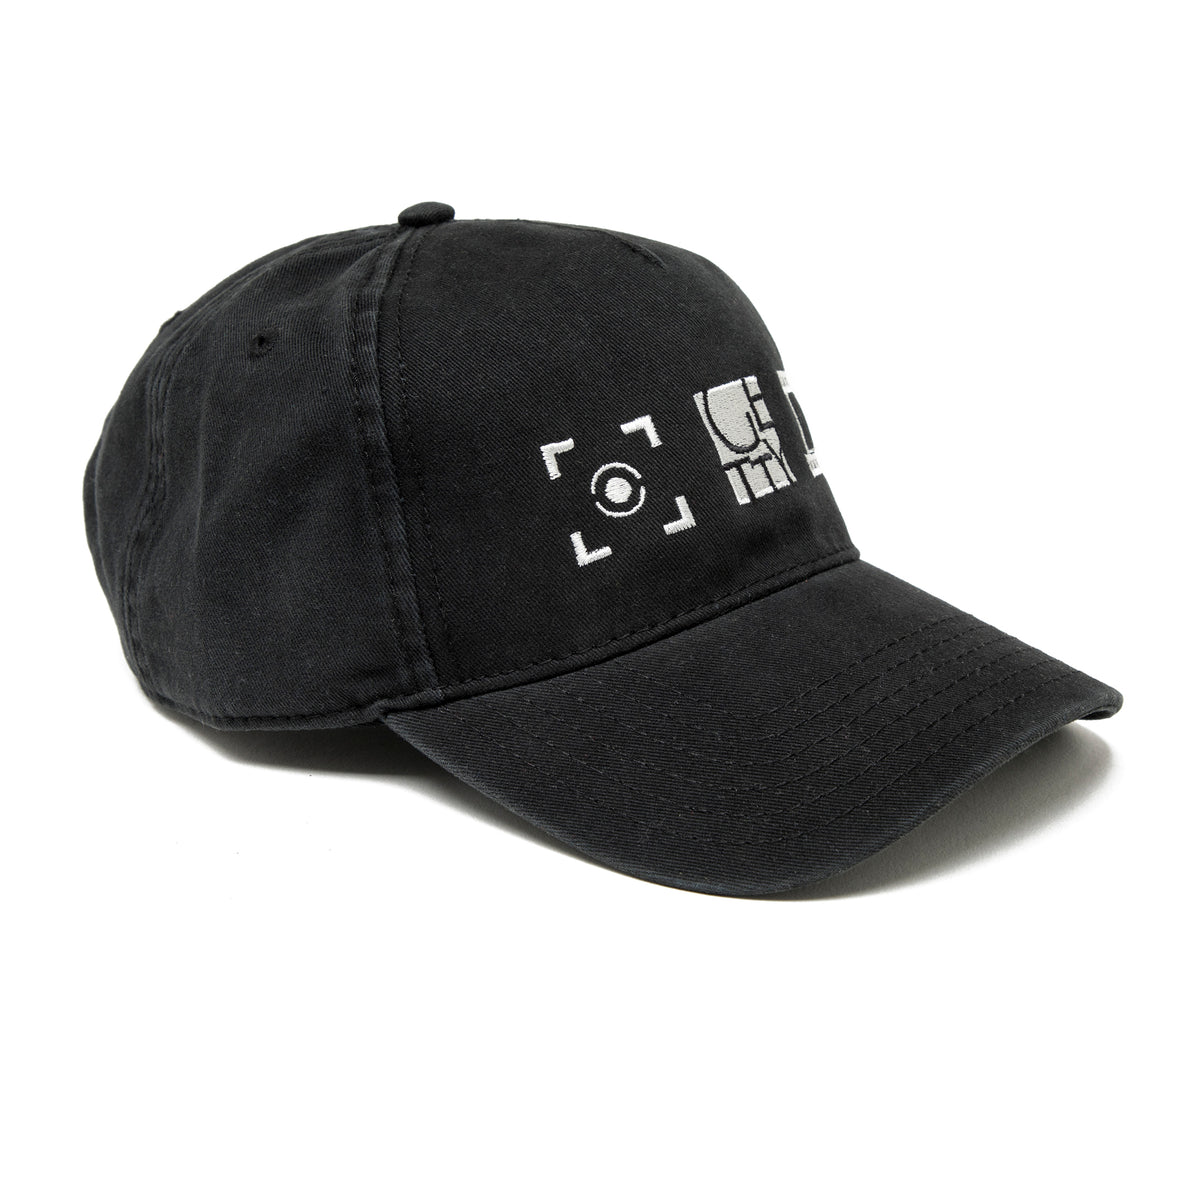 Getty Embroidered Photo icons Cap-side view | Getty Store